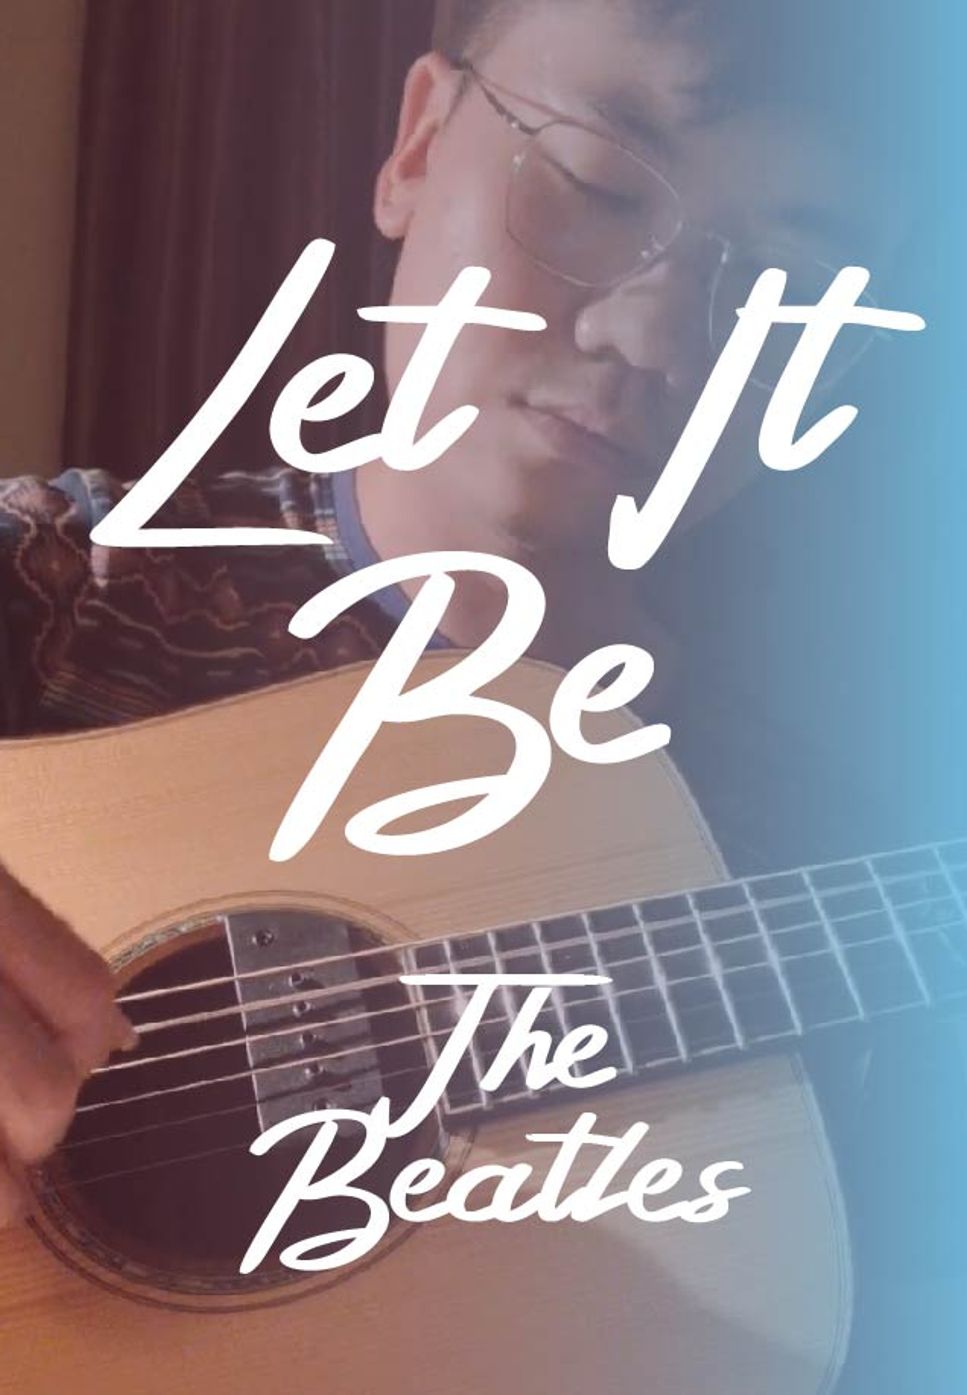 The Beatles - Let It Be (Fingerstyle) by HowMing